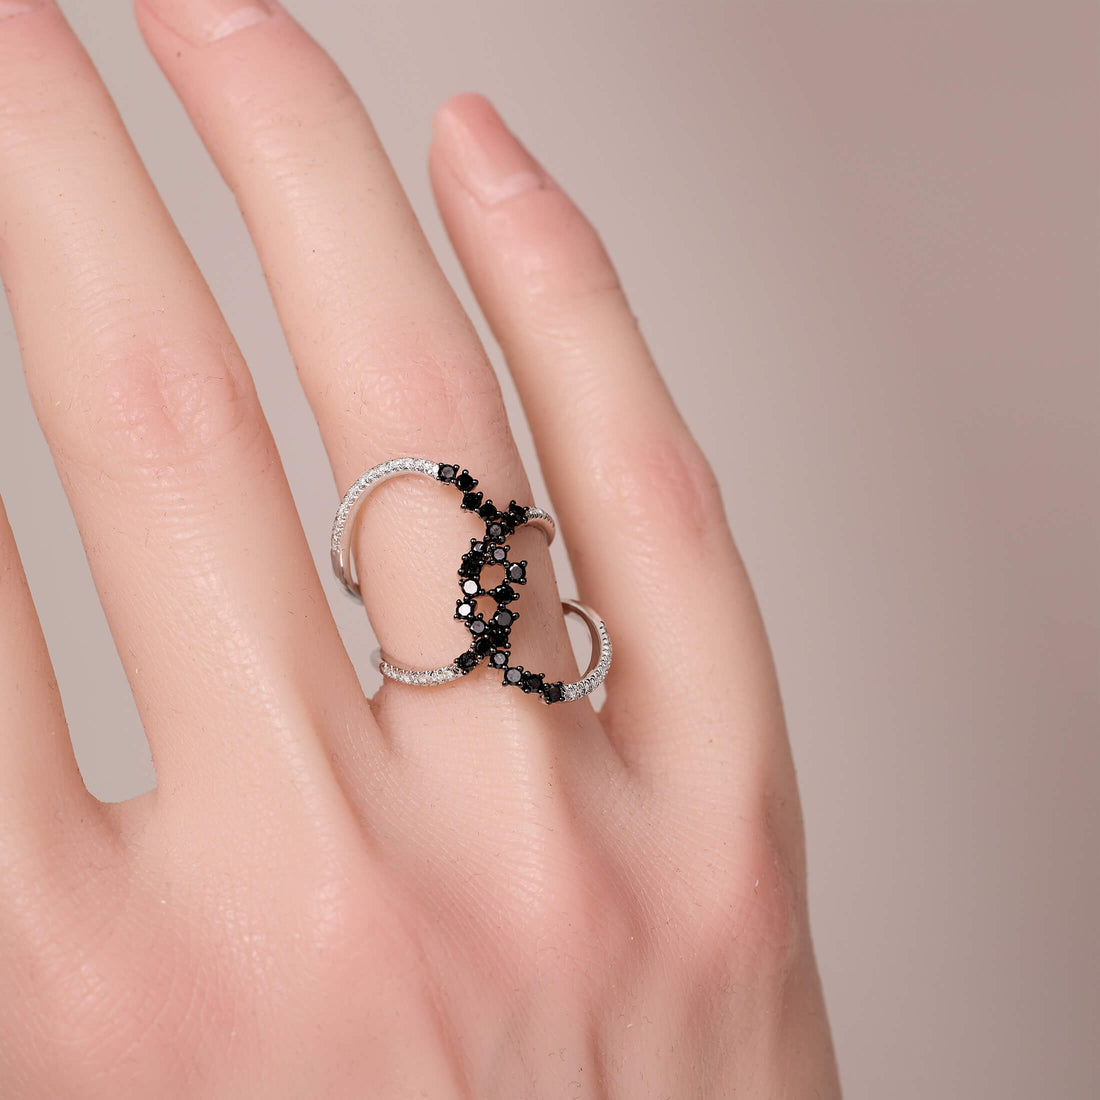 X-Curved Statement Ring with White and Black Diamonds